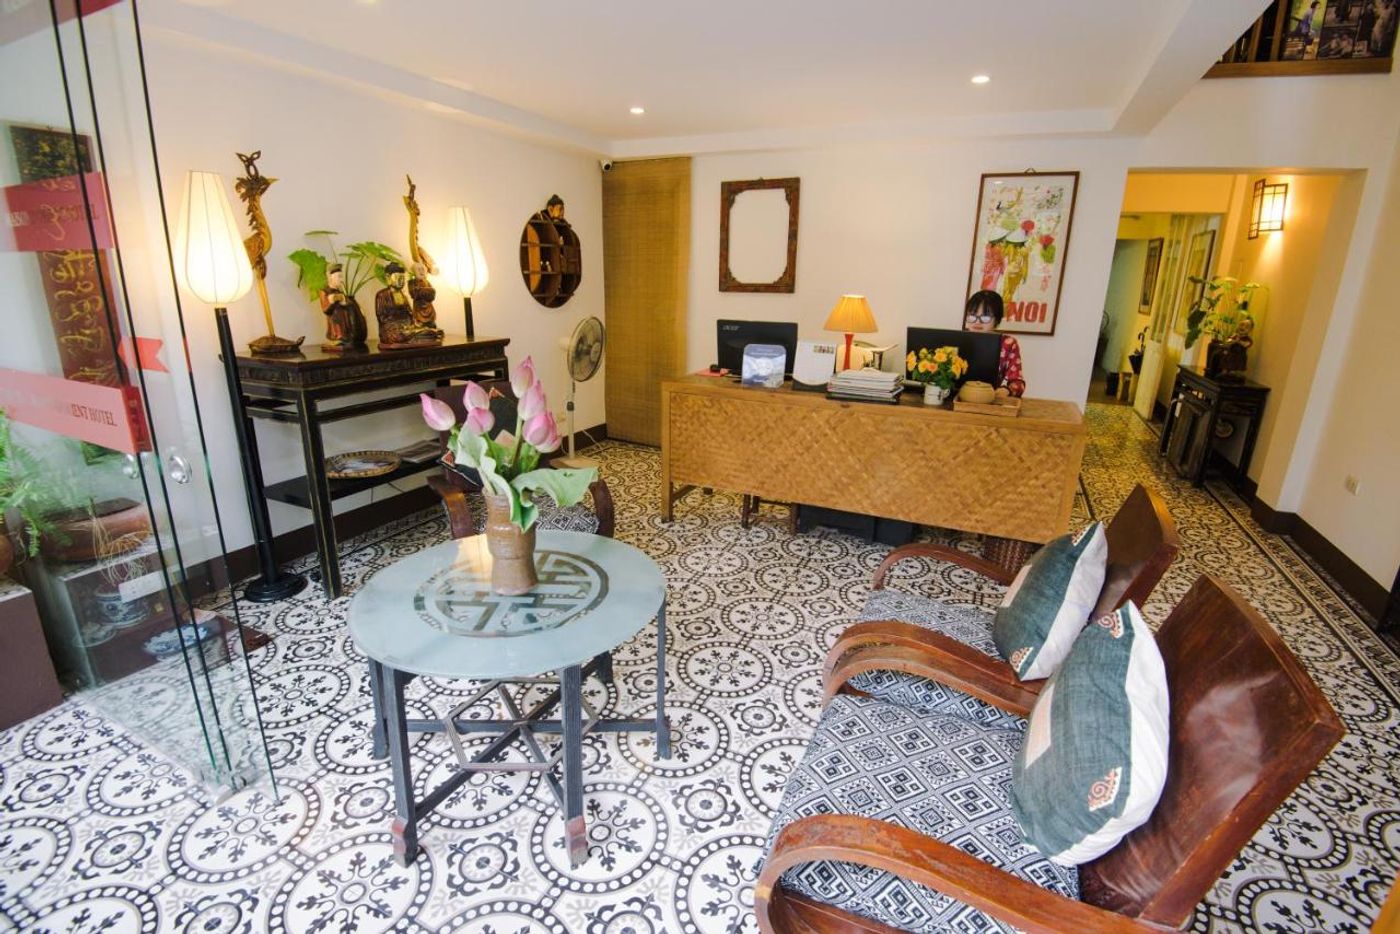 Top boutique hotels in Hanoi